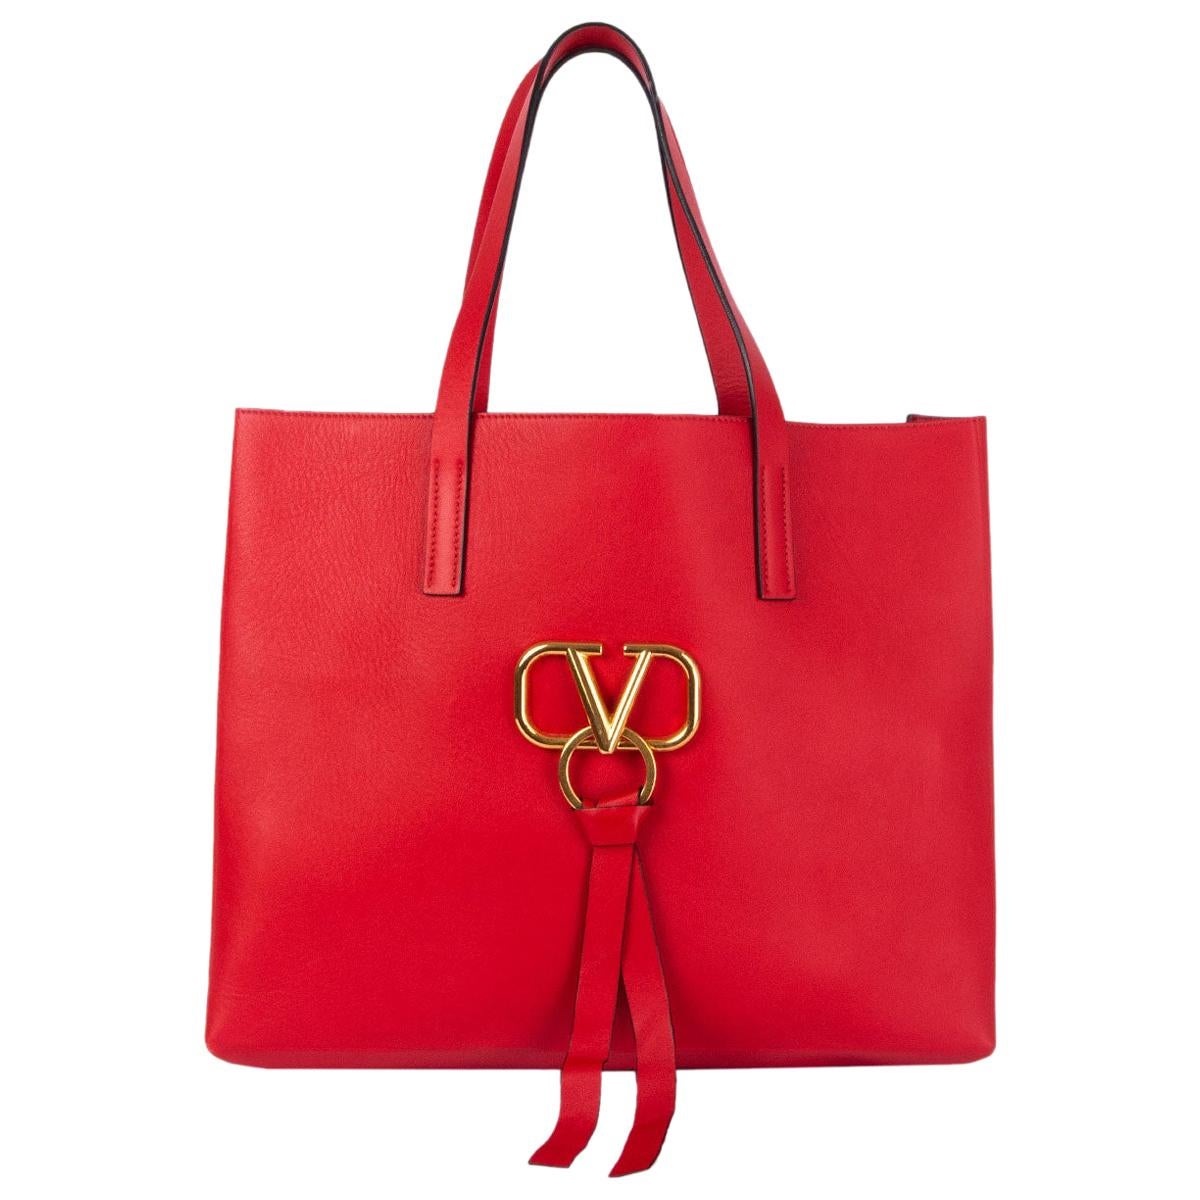 VALENTINO red leather VRING LARGE TOTE Bag